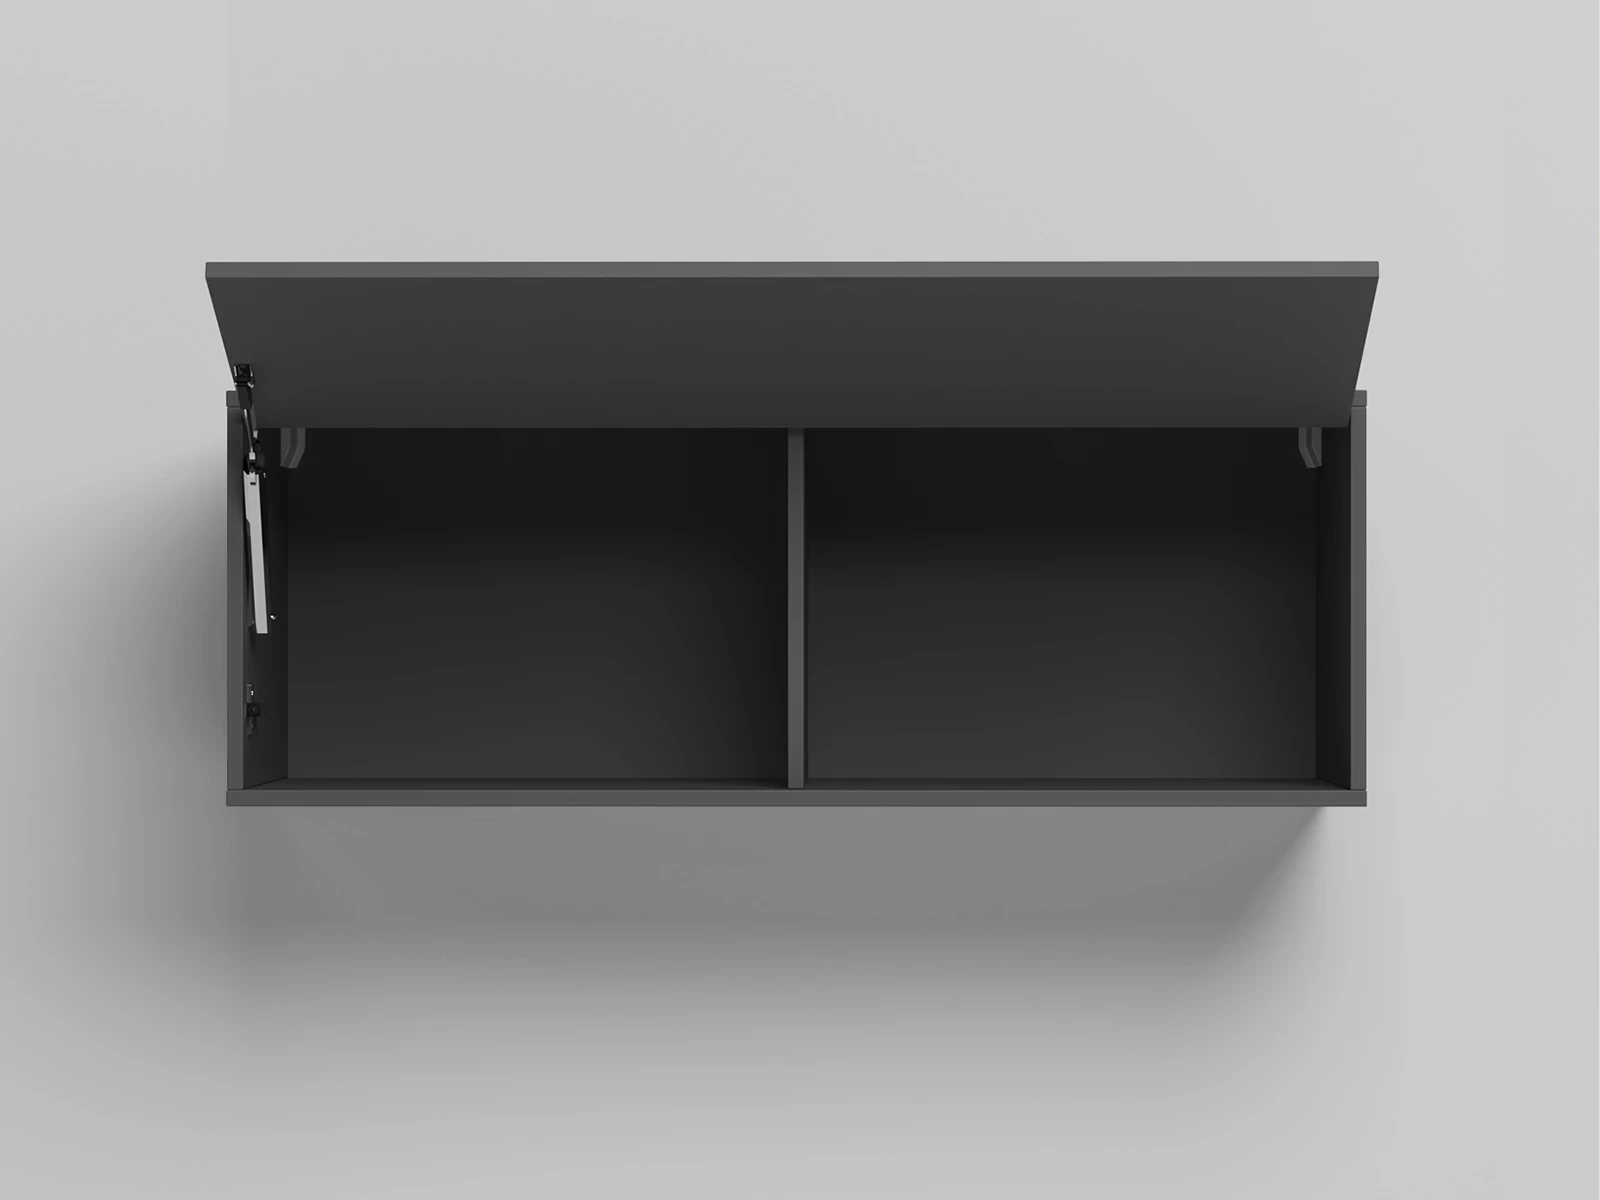 2 Wall cabinet - One door Anthracite / White Gloss